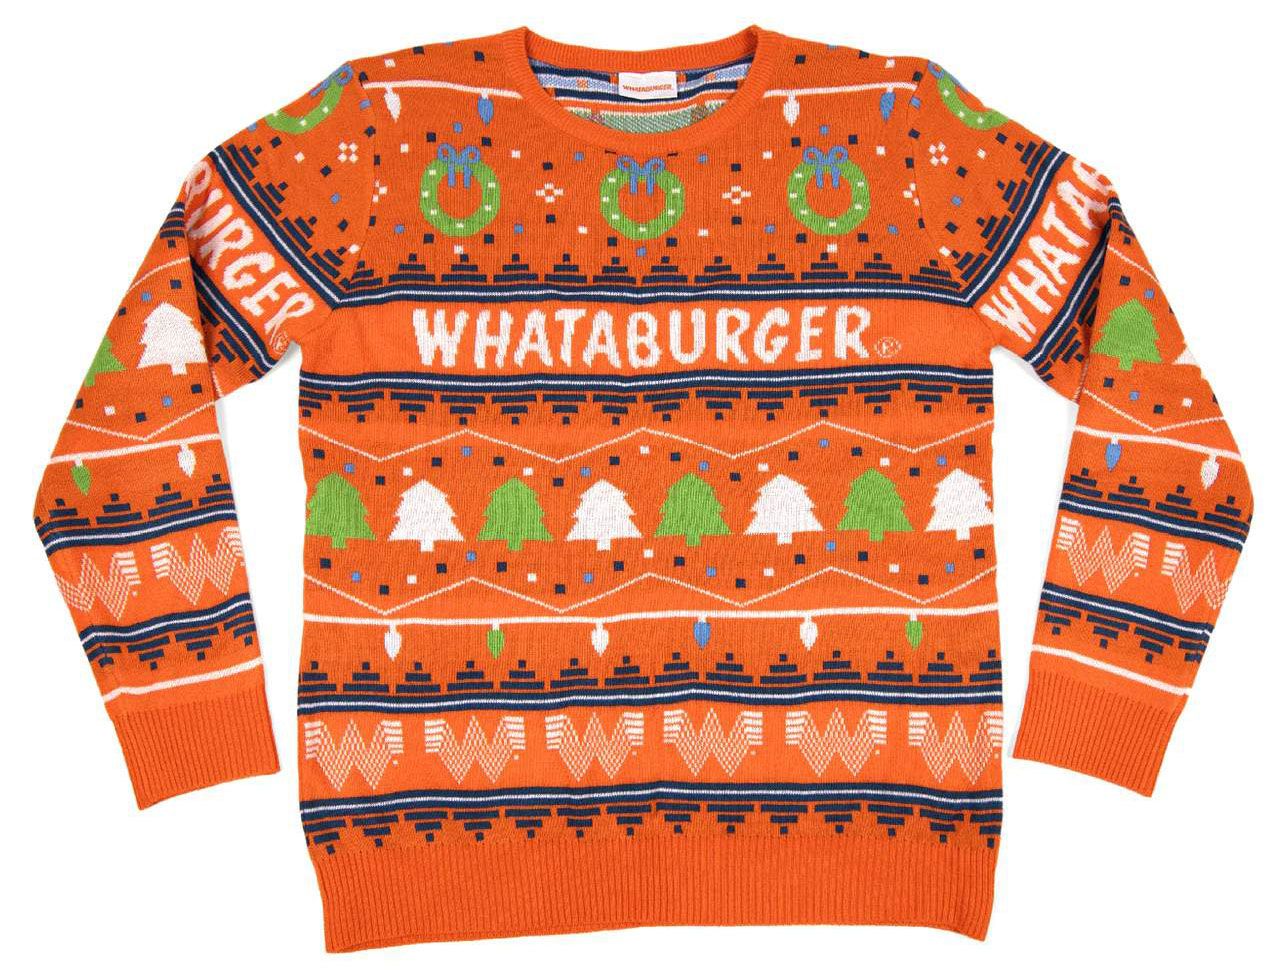 The Whataburger Online Shop is Packed with New Holiday Gifts, Apparel, Decor and More